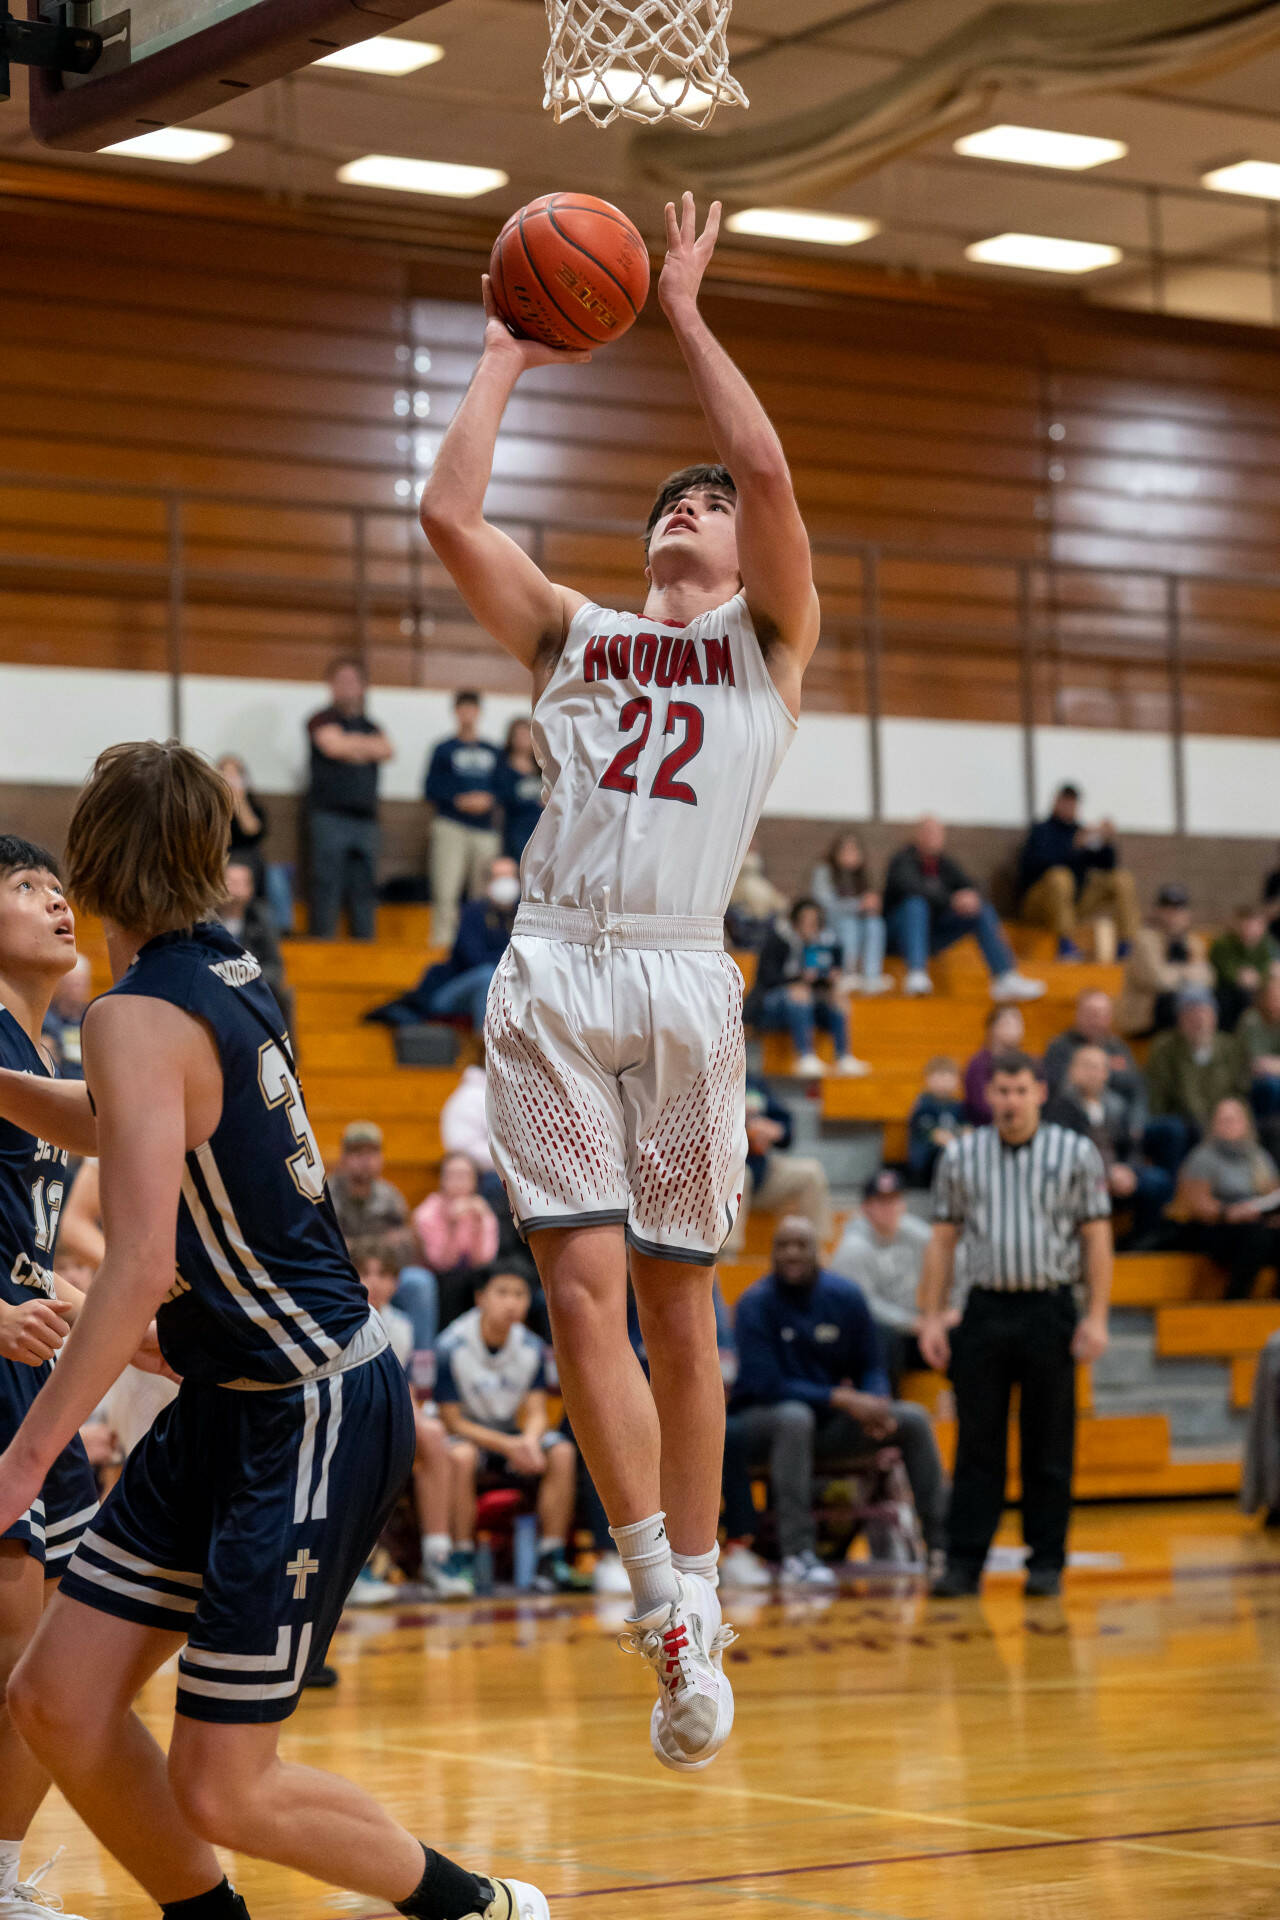 PHOTO BY FOREST WORGUM Hoquiam’s Aiden Butcher scores on a layup in a 63-45 season-ending loss to Seton Catholic in a 1A District 4 Tournament elimination game on Thursday in Montesano.